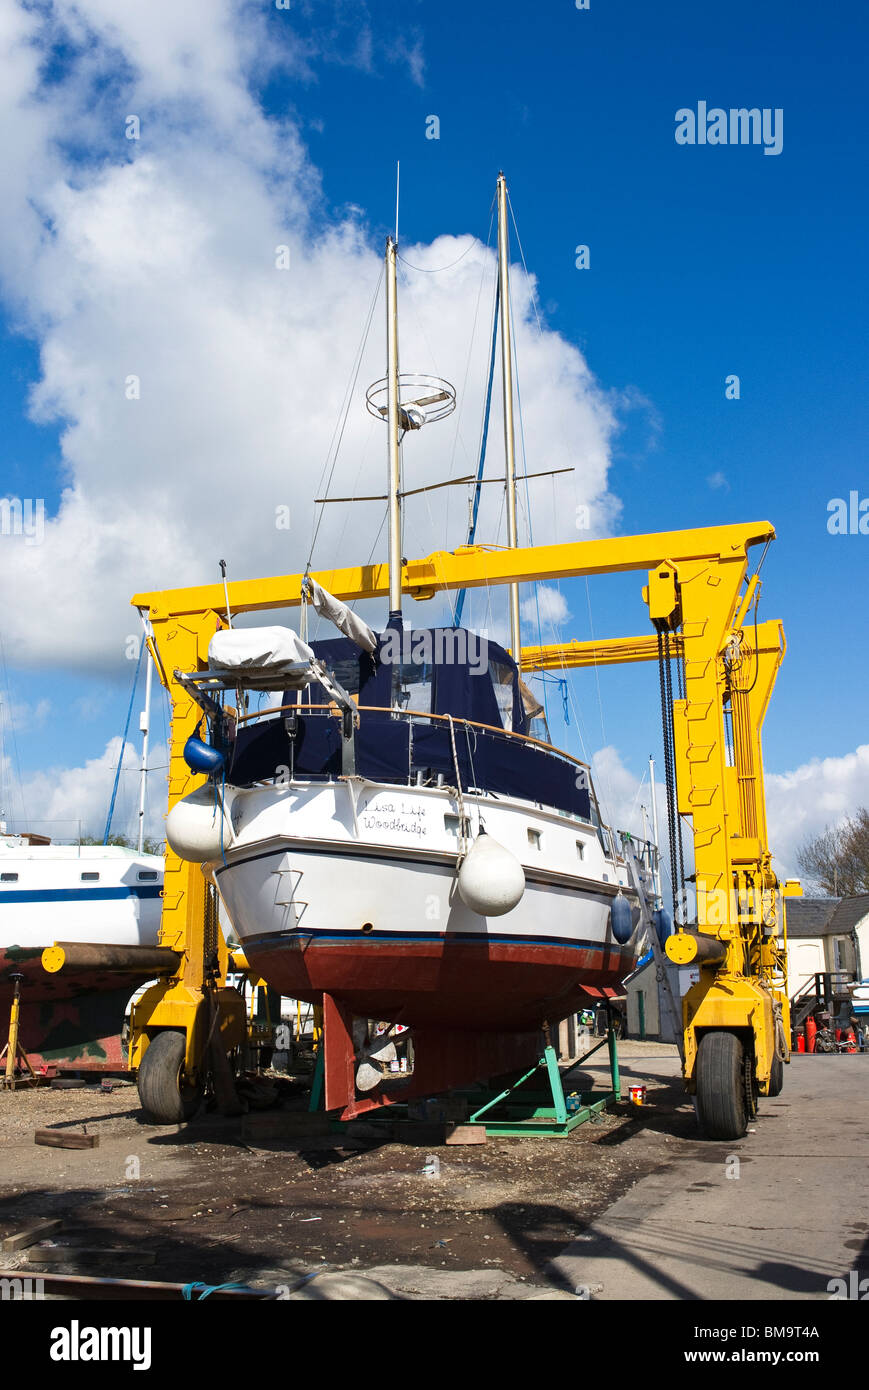 Mobile heavy lift device for removing yachts for dry maintenance in Suffolk UK Stock Photo